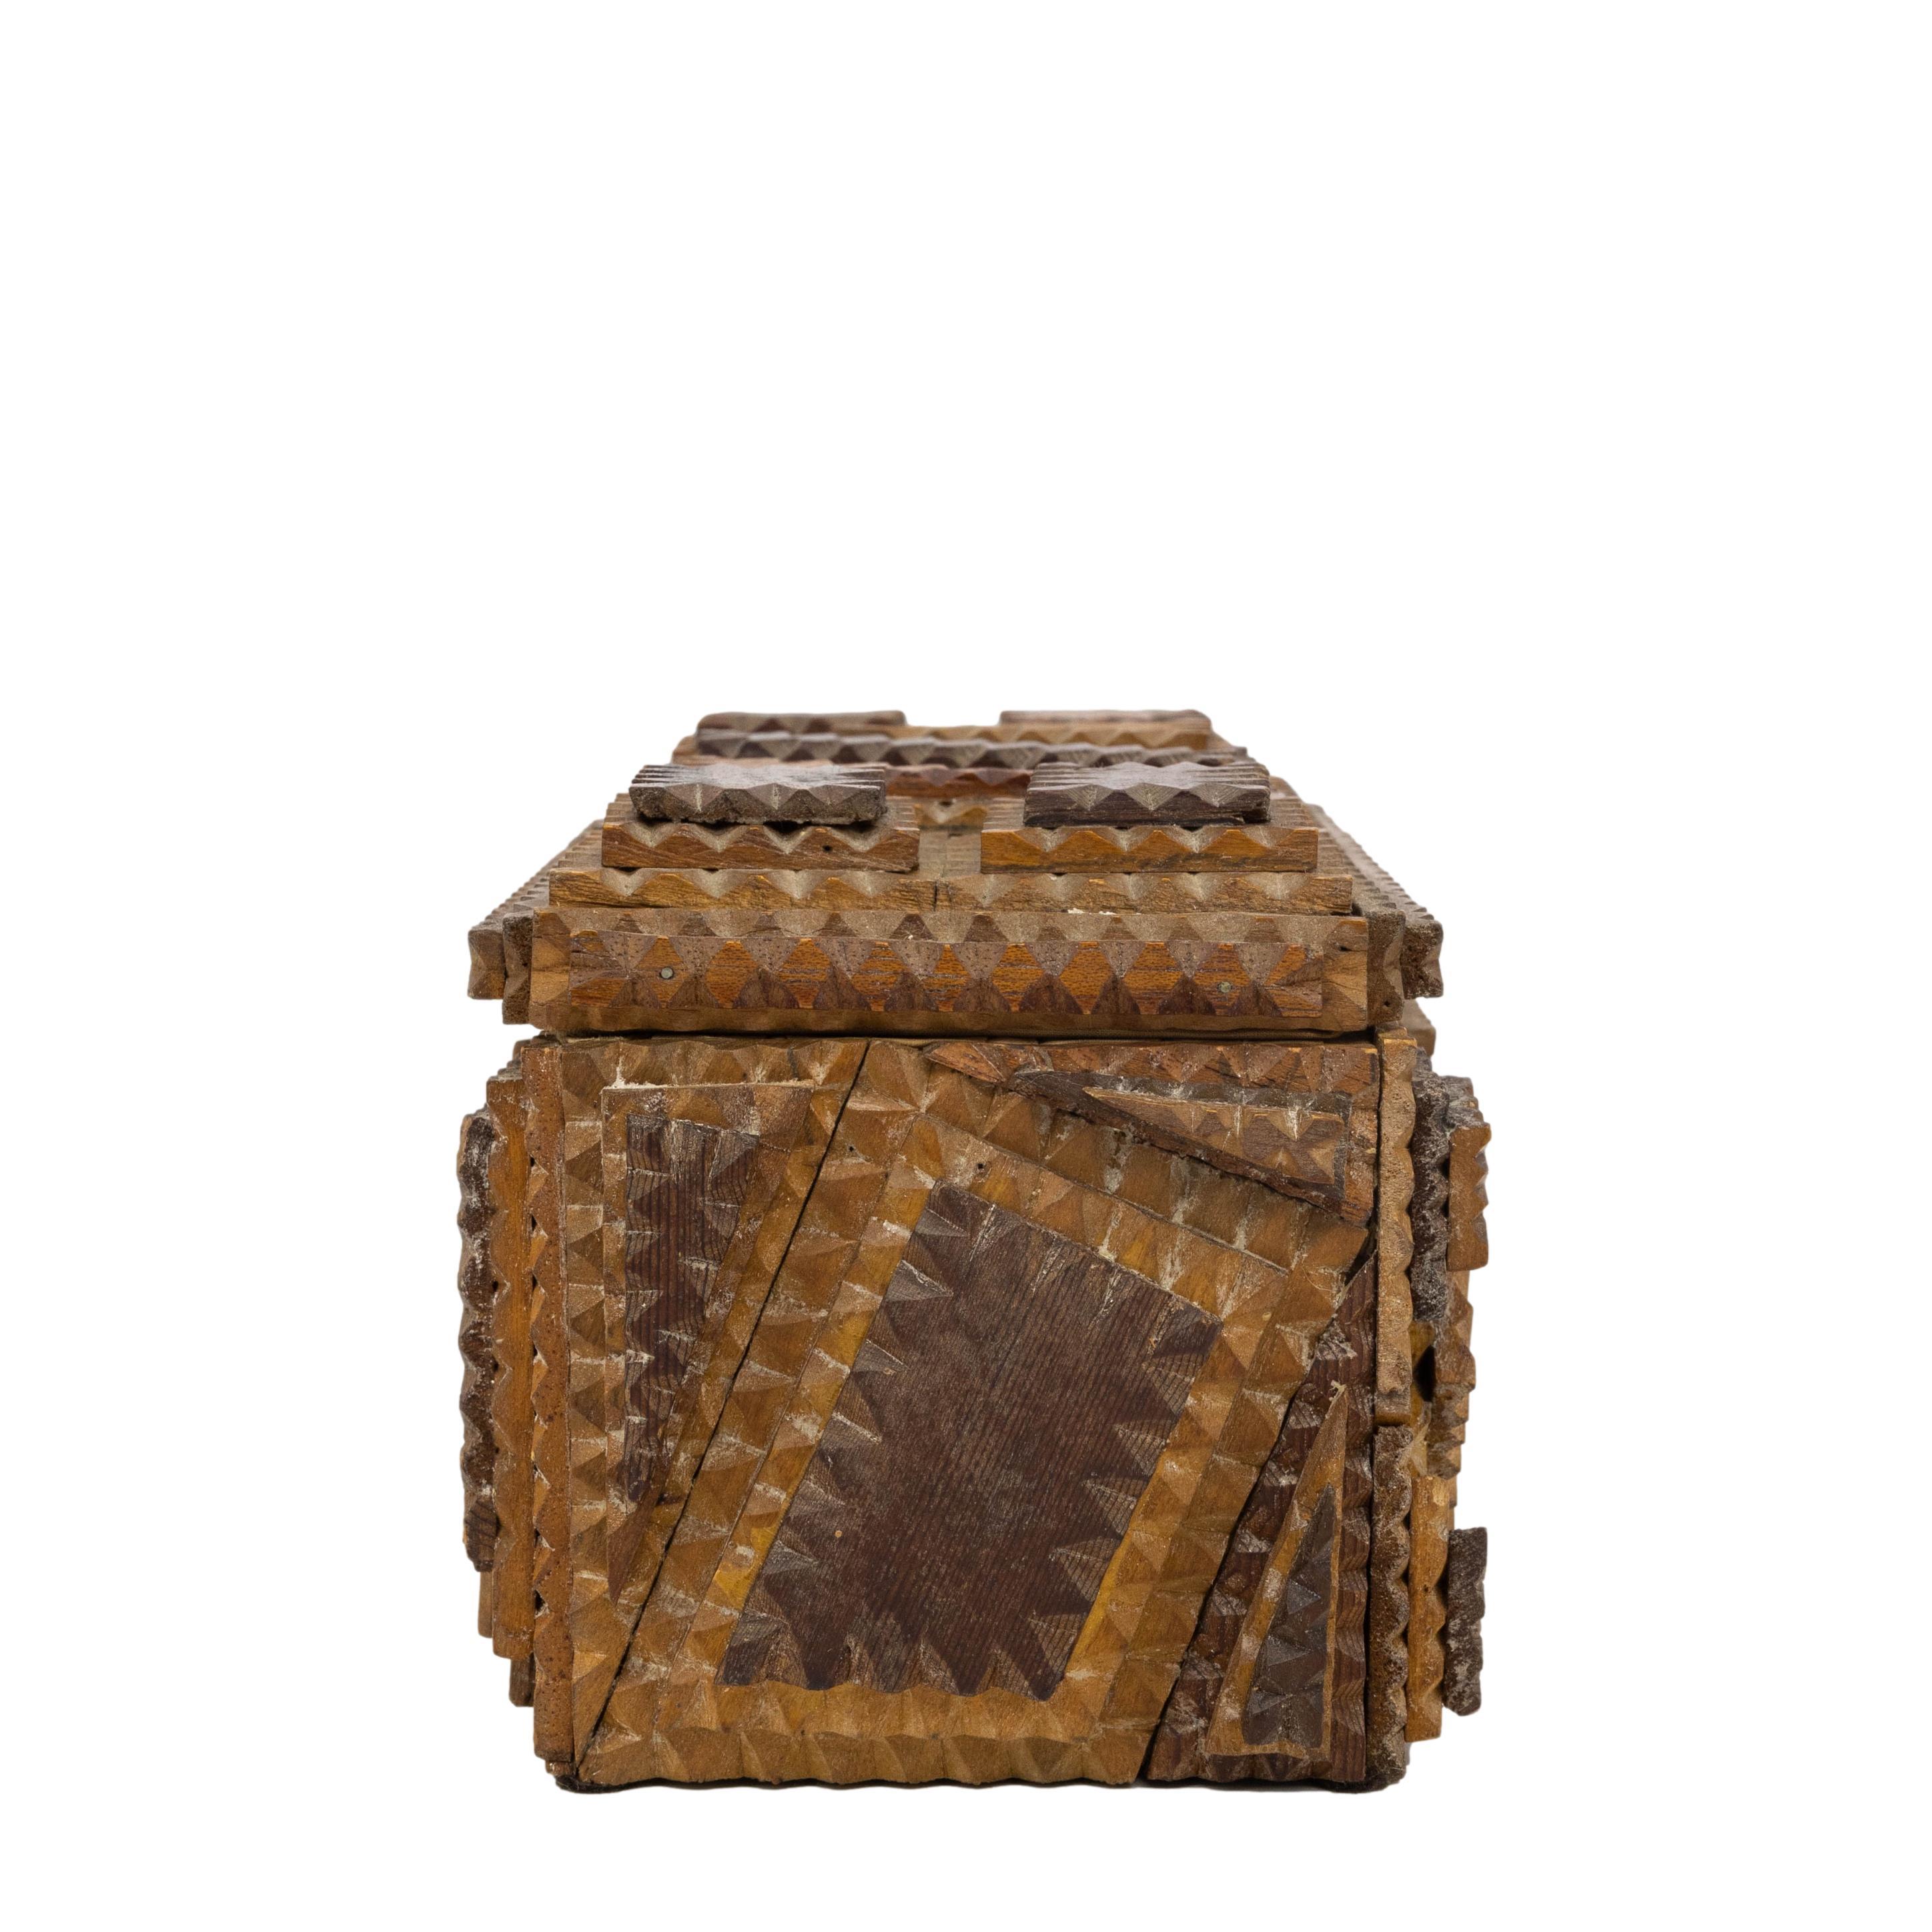 Hand-Carved Tramp Art Lift-Top Box with Notched and Layered Geometrical Design, ca. 1920 For Sale